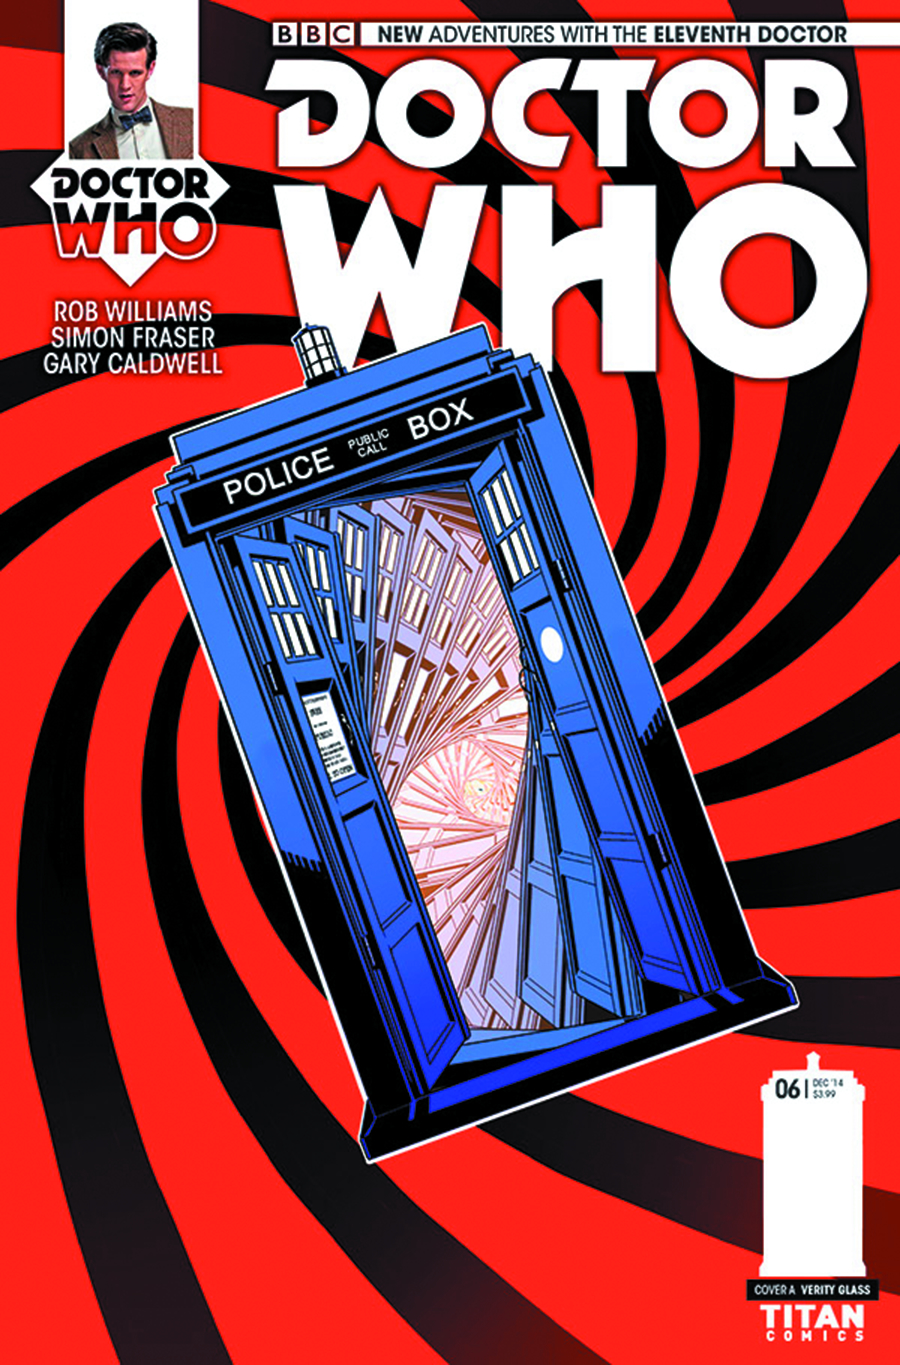 DOCTOR WHO 11TH #6 REG GLASS